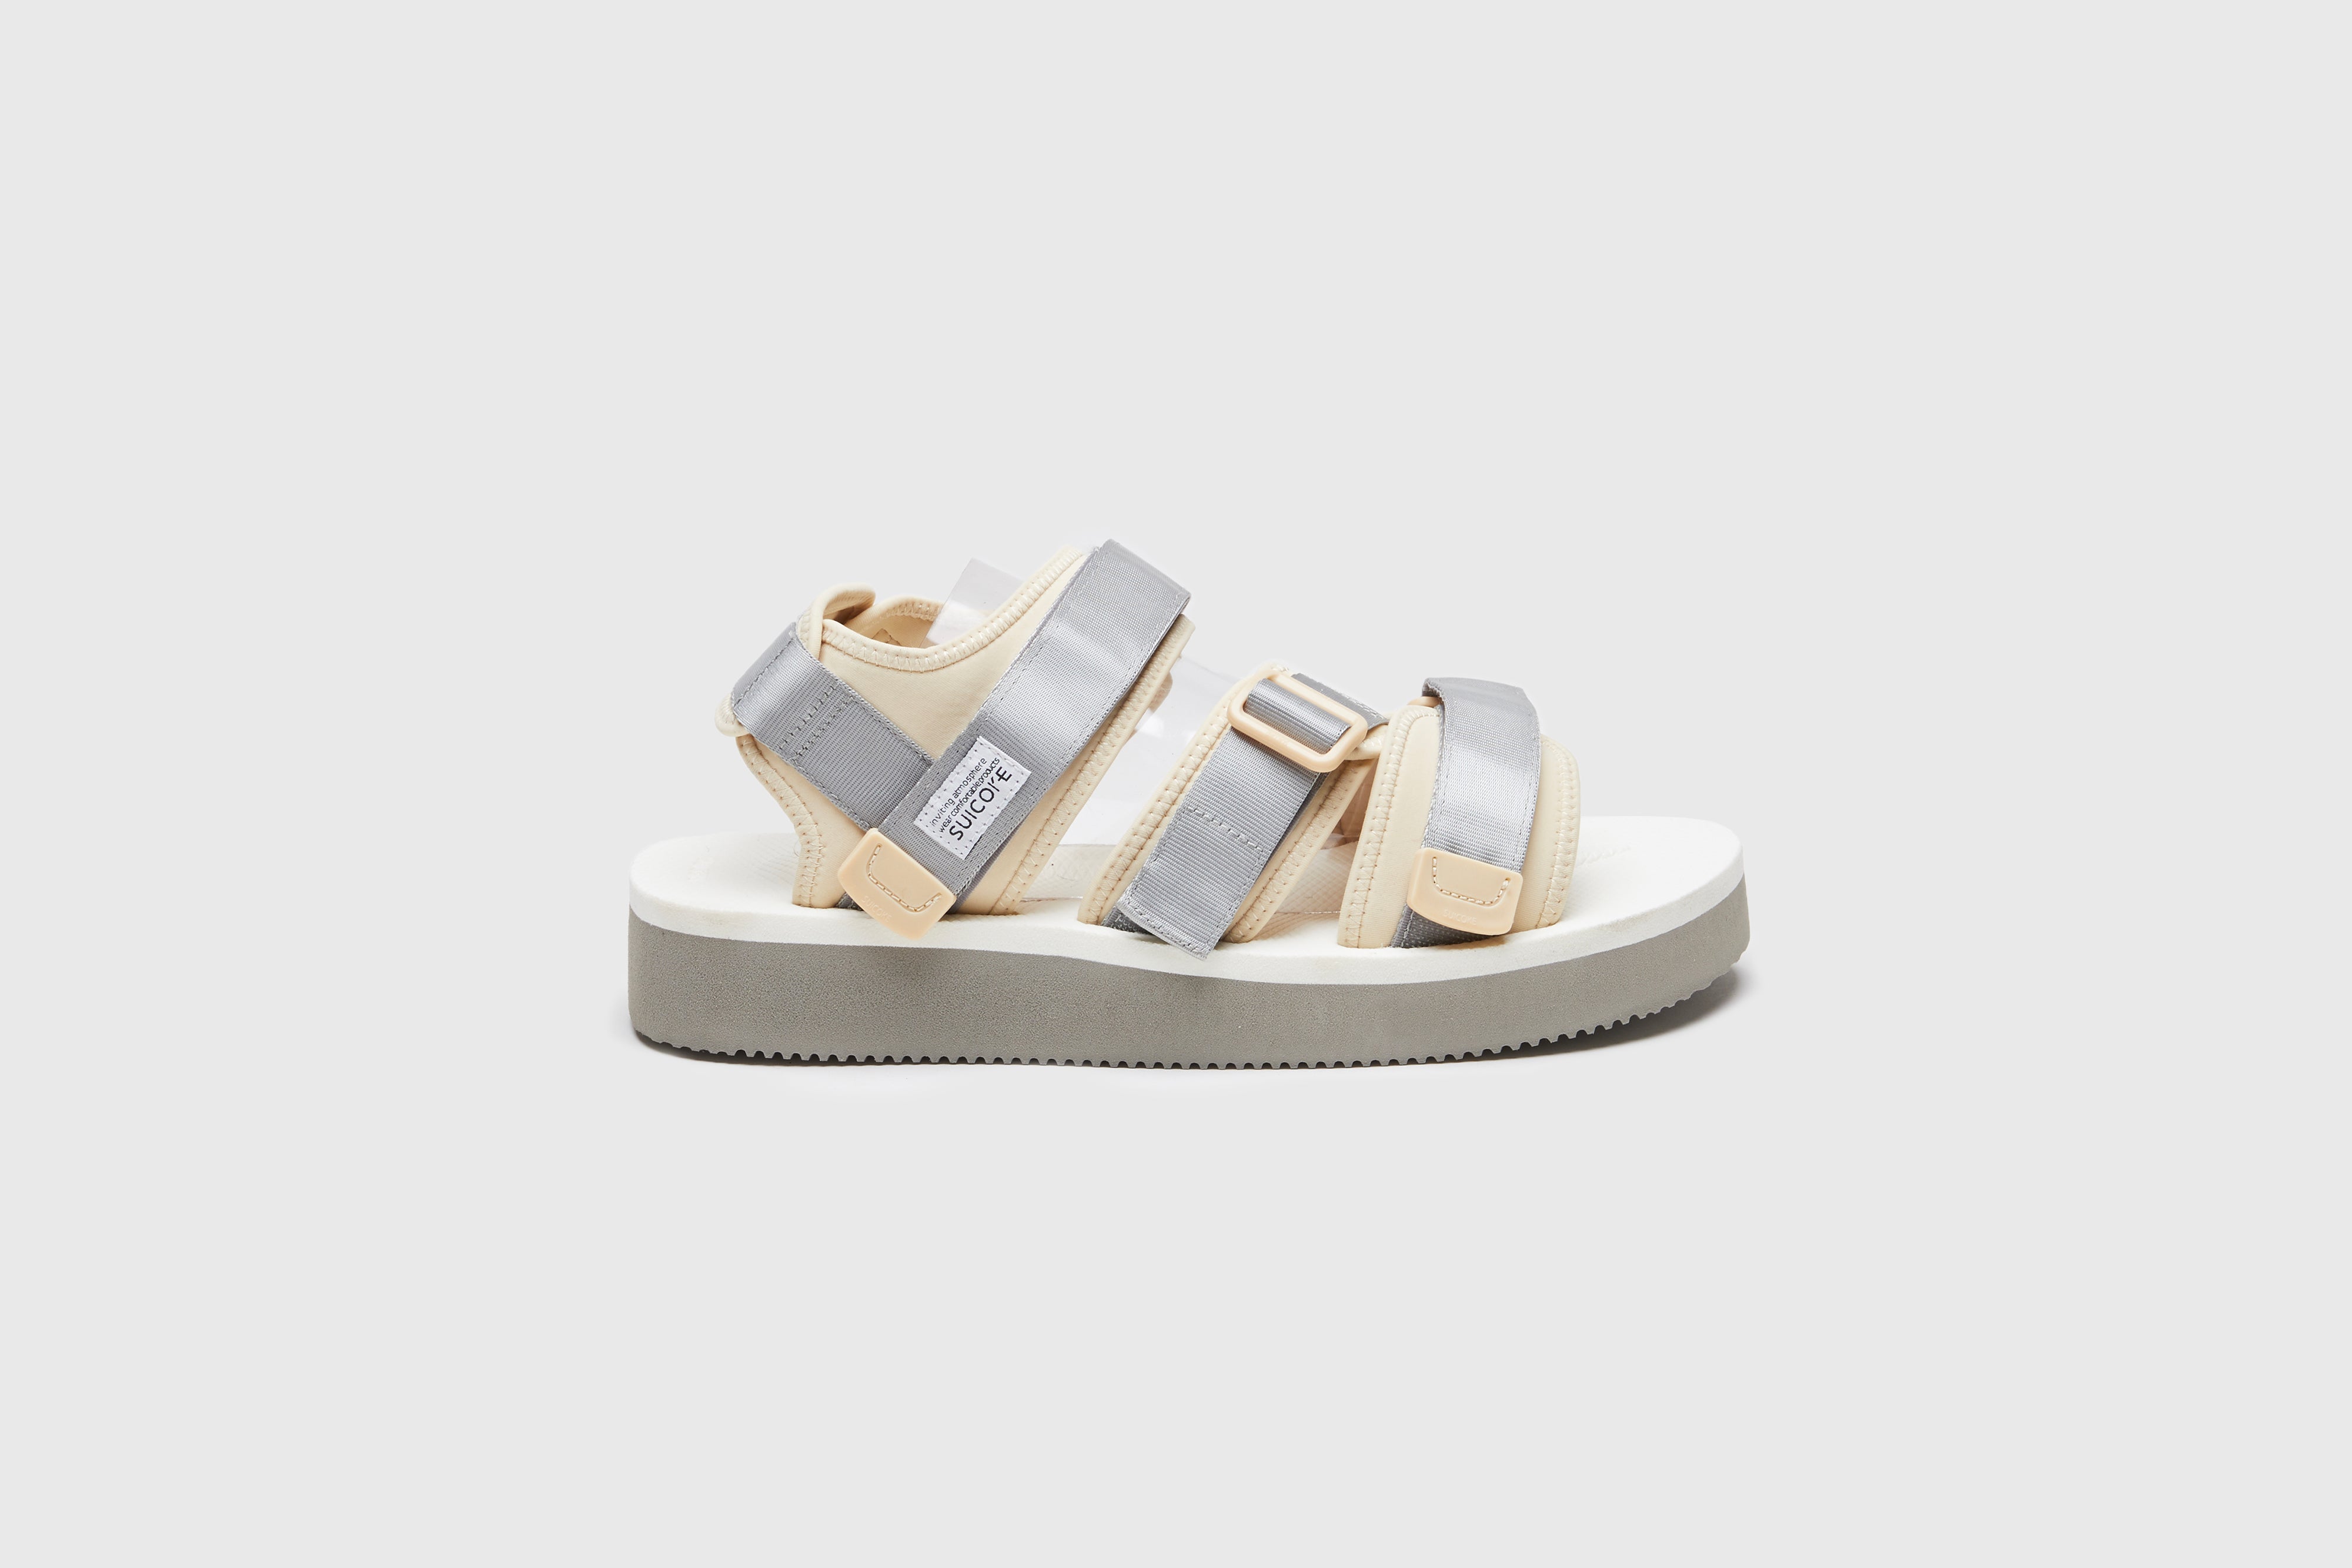 SUICOKE KISEE-PO sandals with gray & white nylon upper, gray & white midsole and sole, strap and logo patch. From Spring/Summer 2023 collection on eightywingold Web Store, an official partner of SUICOKE. OG-044PO GRAY X WHITE